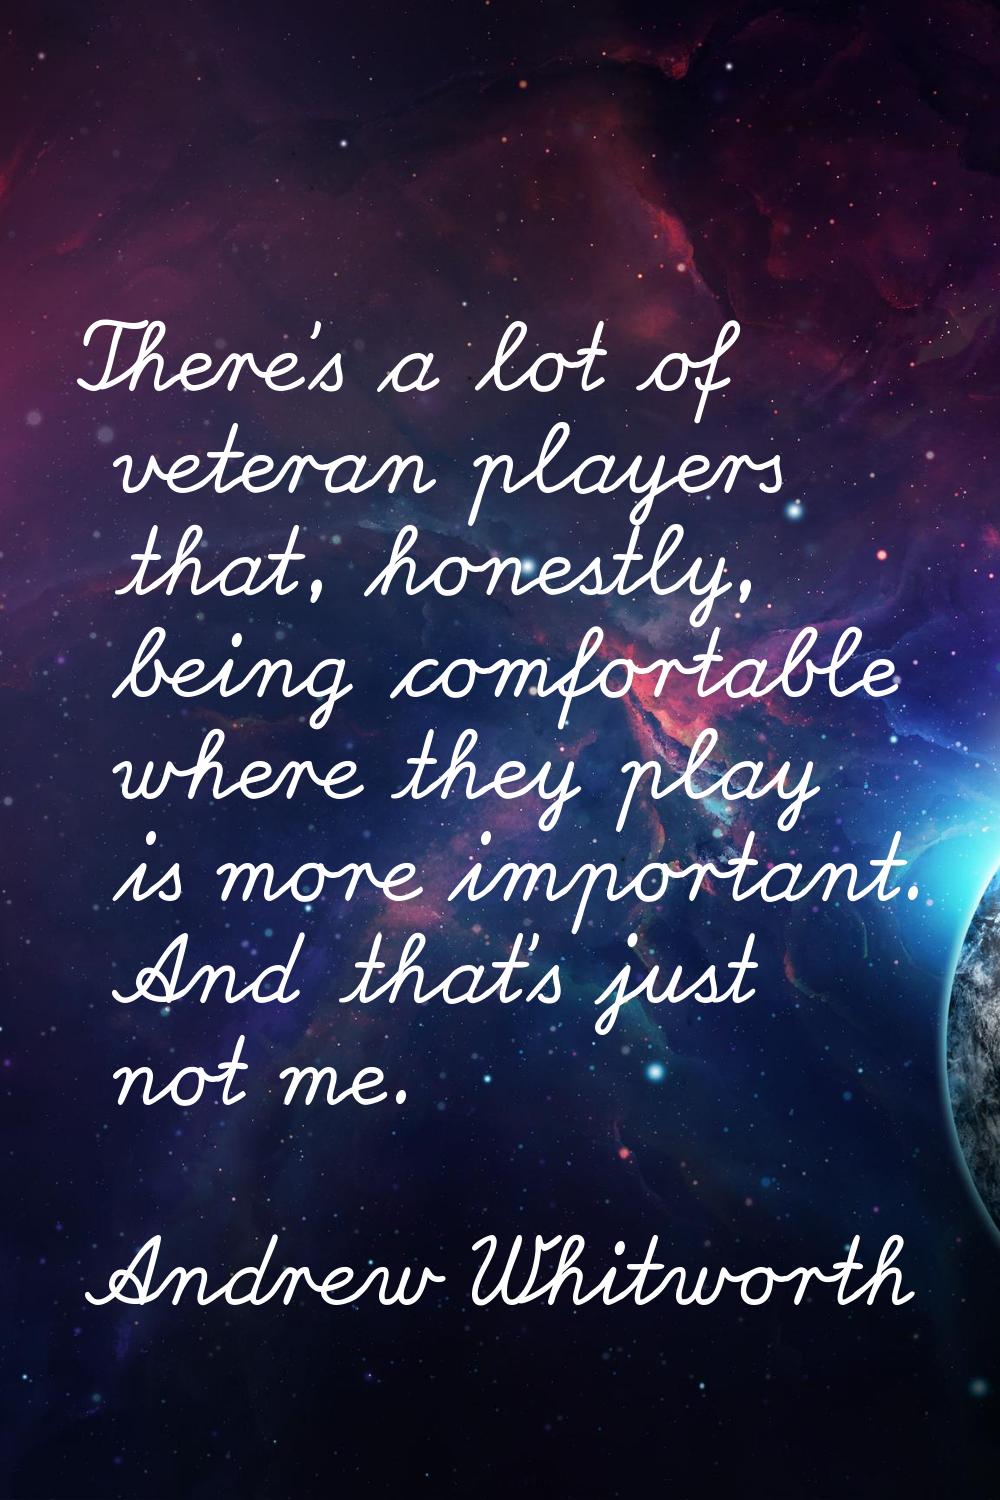 There's a lot of veteran players that, honestly, being comfortable where they play is more importan